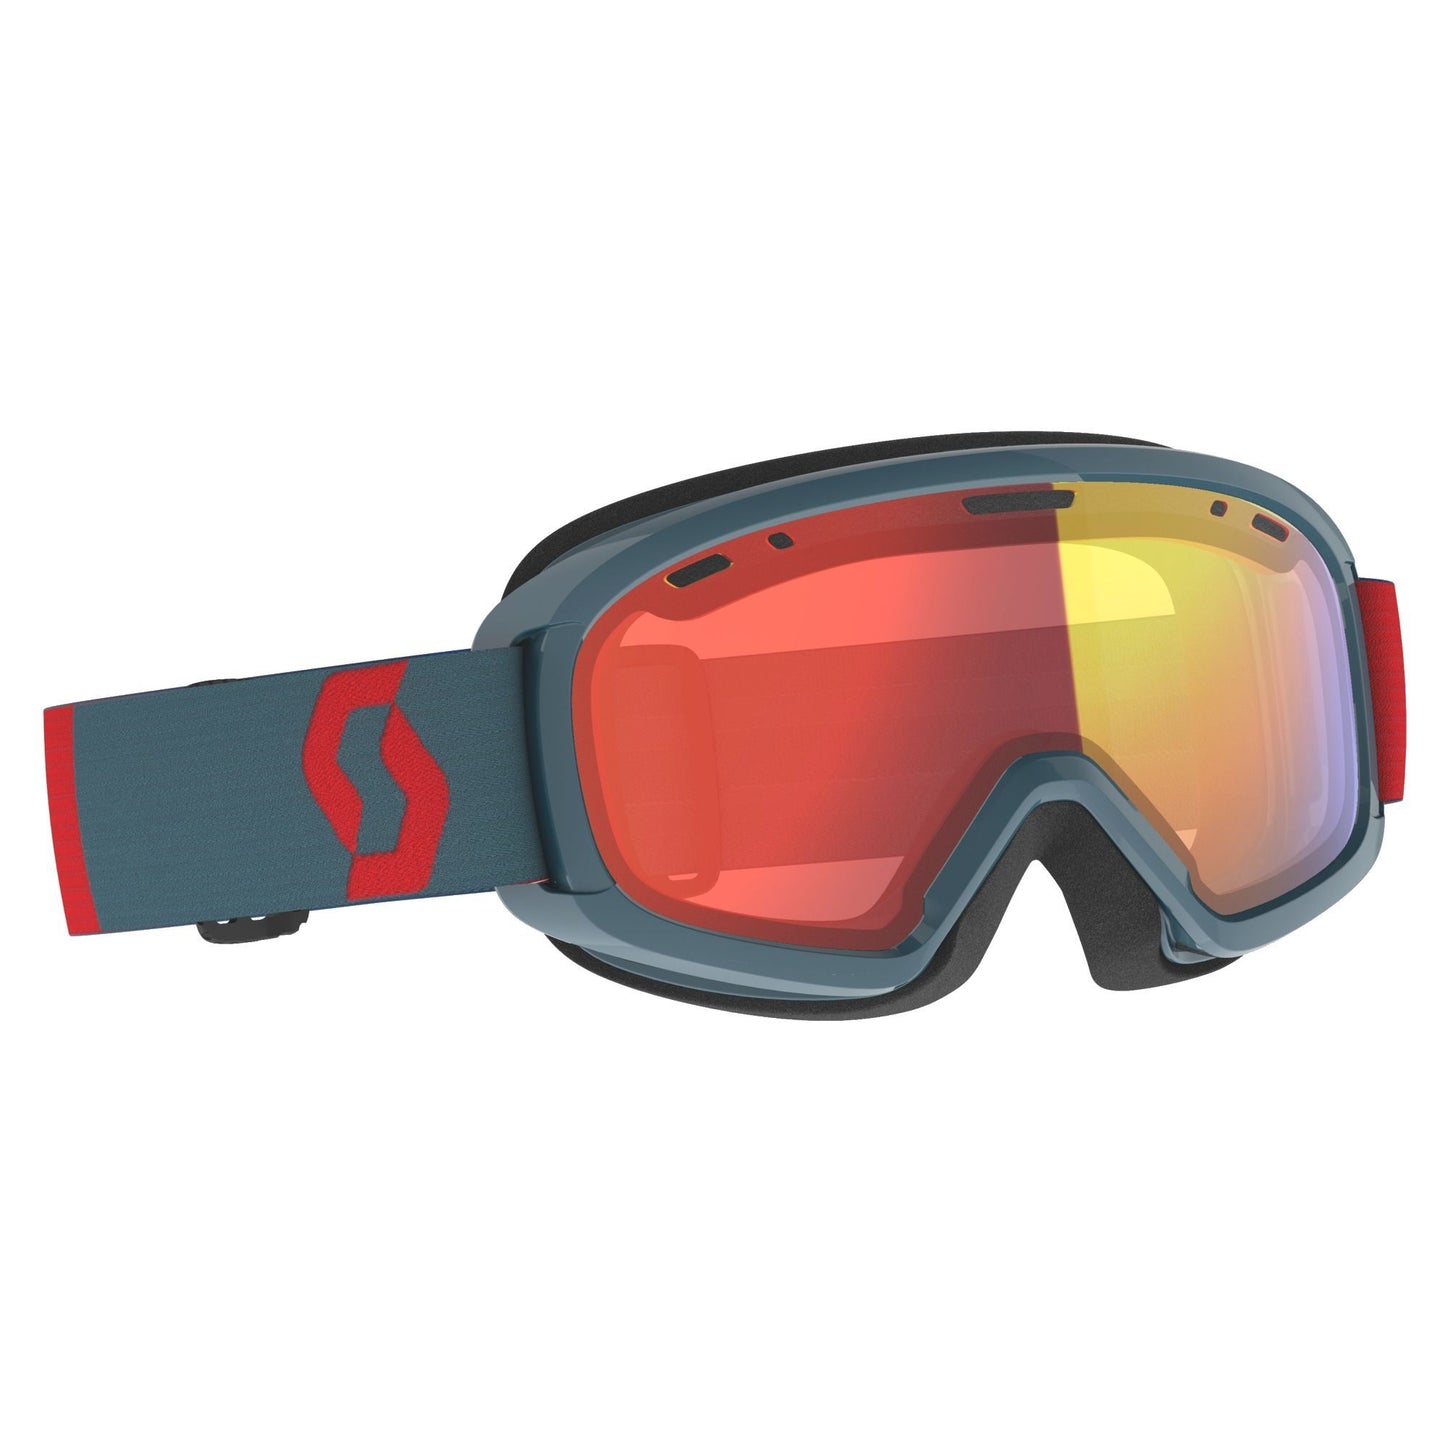 Scott Youth Jr Witty Chrome Snow Goggle Neon Red Aruba Green Enhancer Red Chrome Snow Goggles